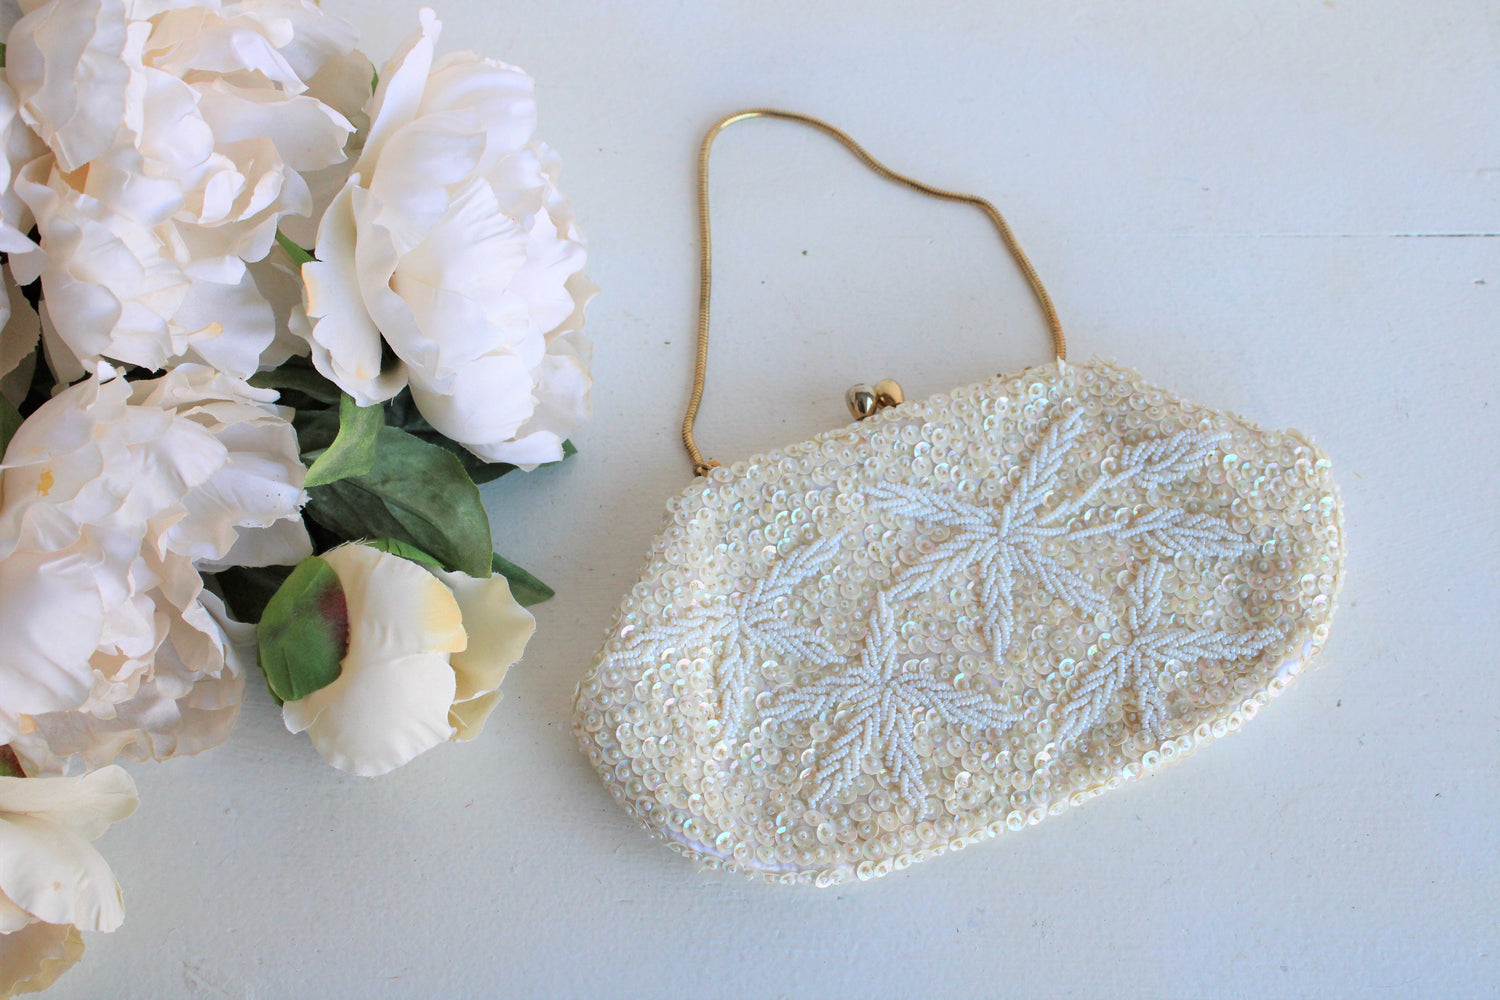 Vintage 1960s Beaded and Sequined Clutch Bag